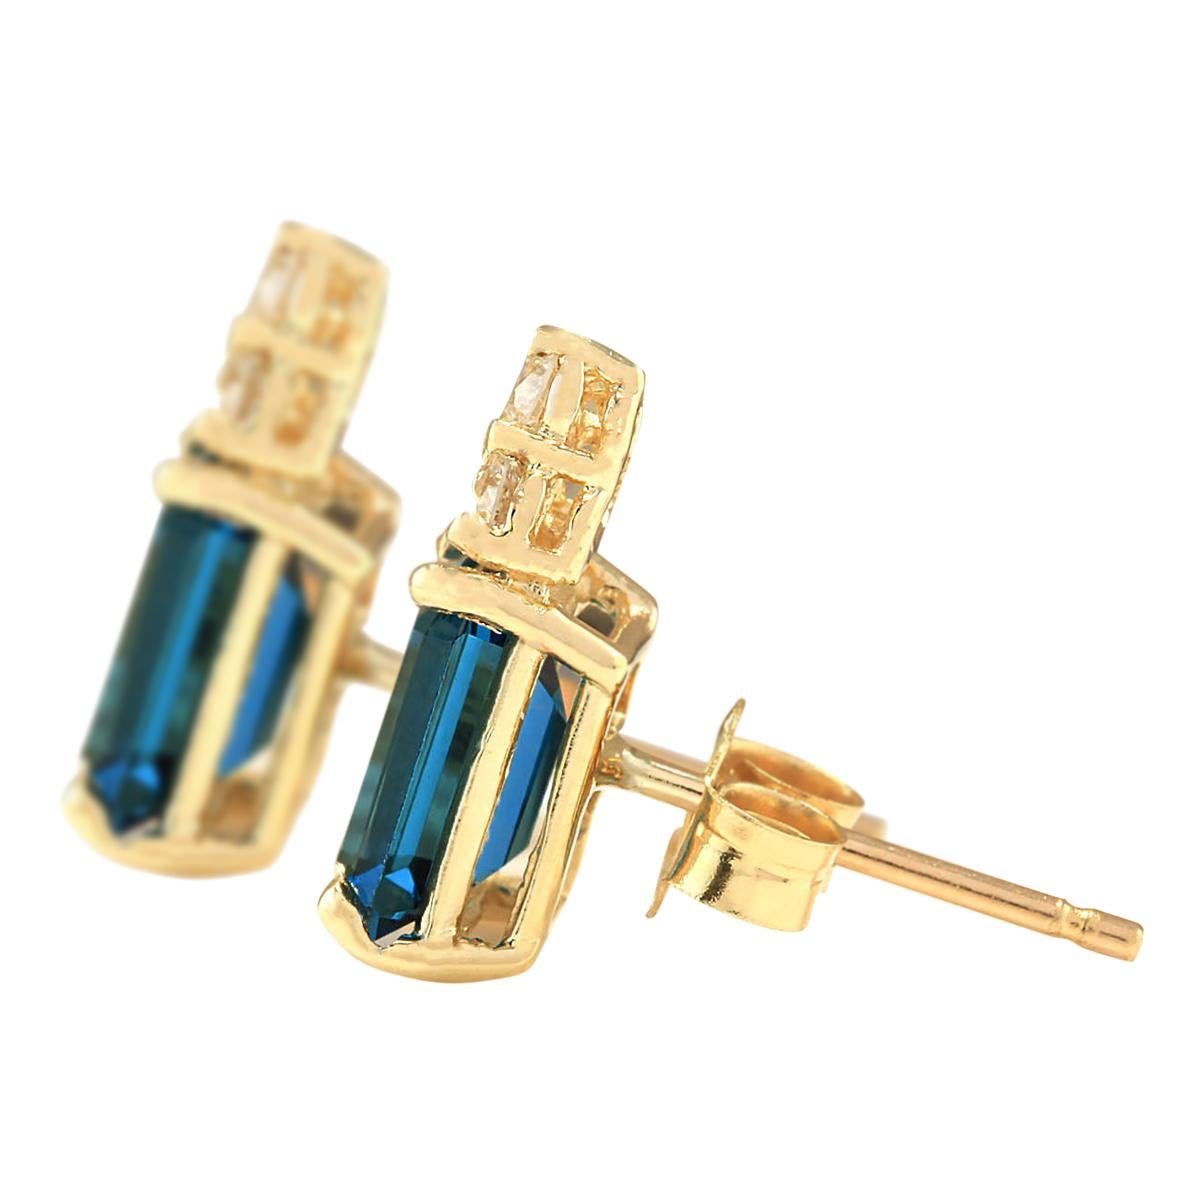 Stamped: 14K Yellow Gold
Total Earrings Weight: 1.5 Grams
Total Natural Topaz Weight is 2.00 Carat (Measures: 7.00x5.00 mm)
Color: London Blue
Total Natural Diamond Weight is 0.15 Carat
Color: F-G, Clarity: VS2-SI1
Face Measures: 11.65x4.85 mm
Sku: